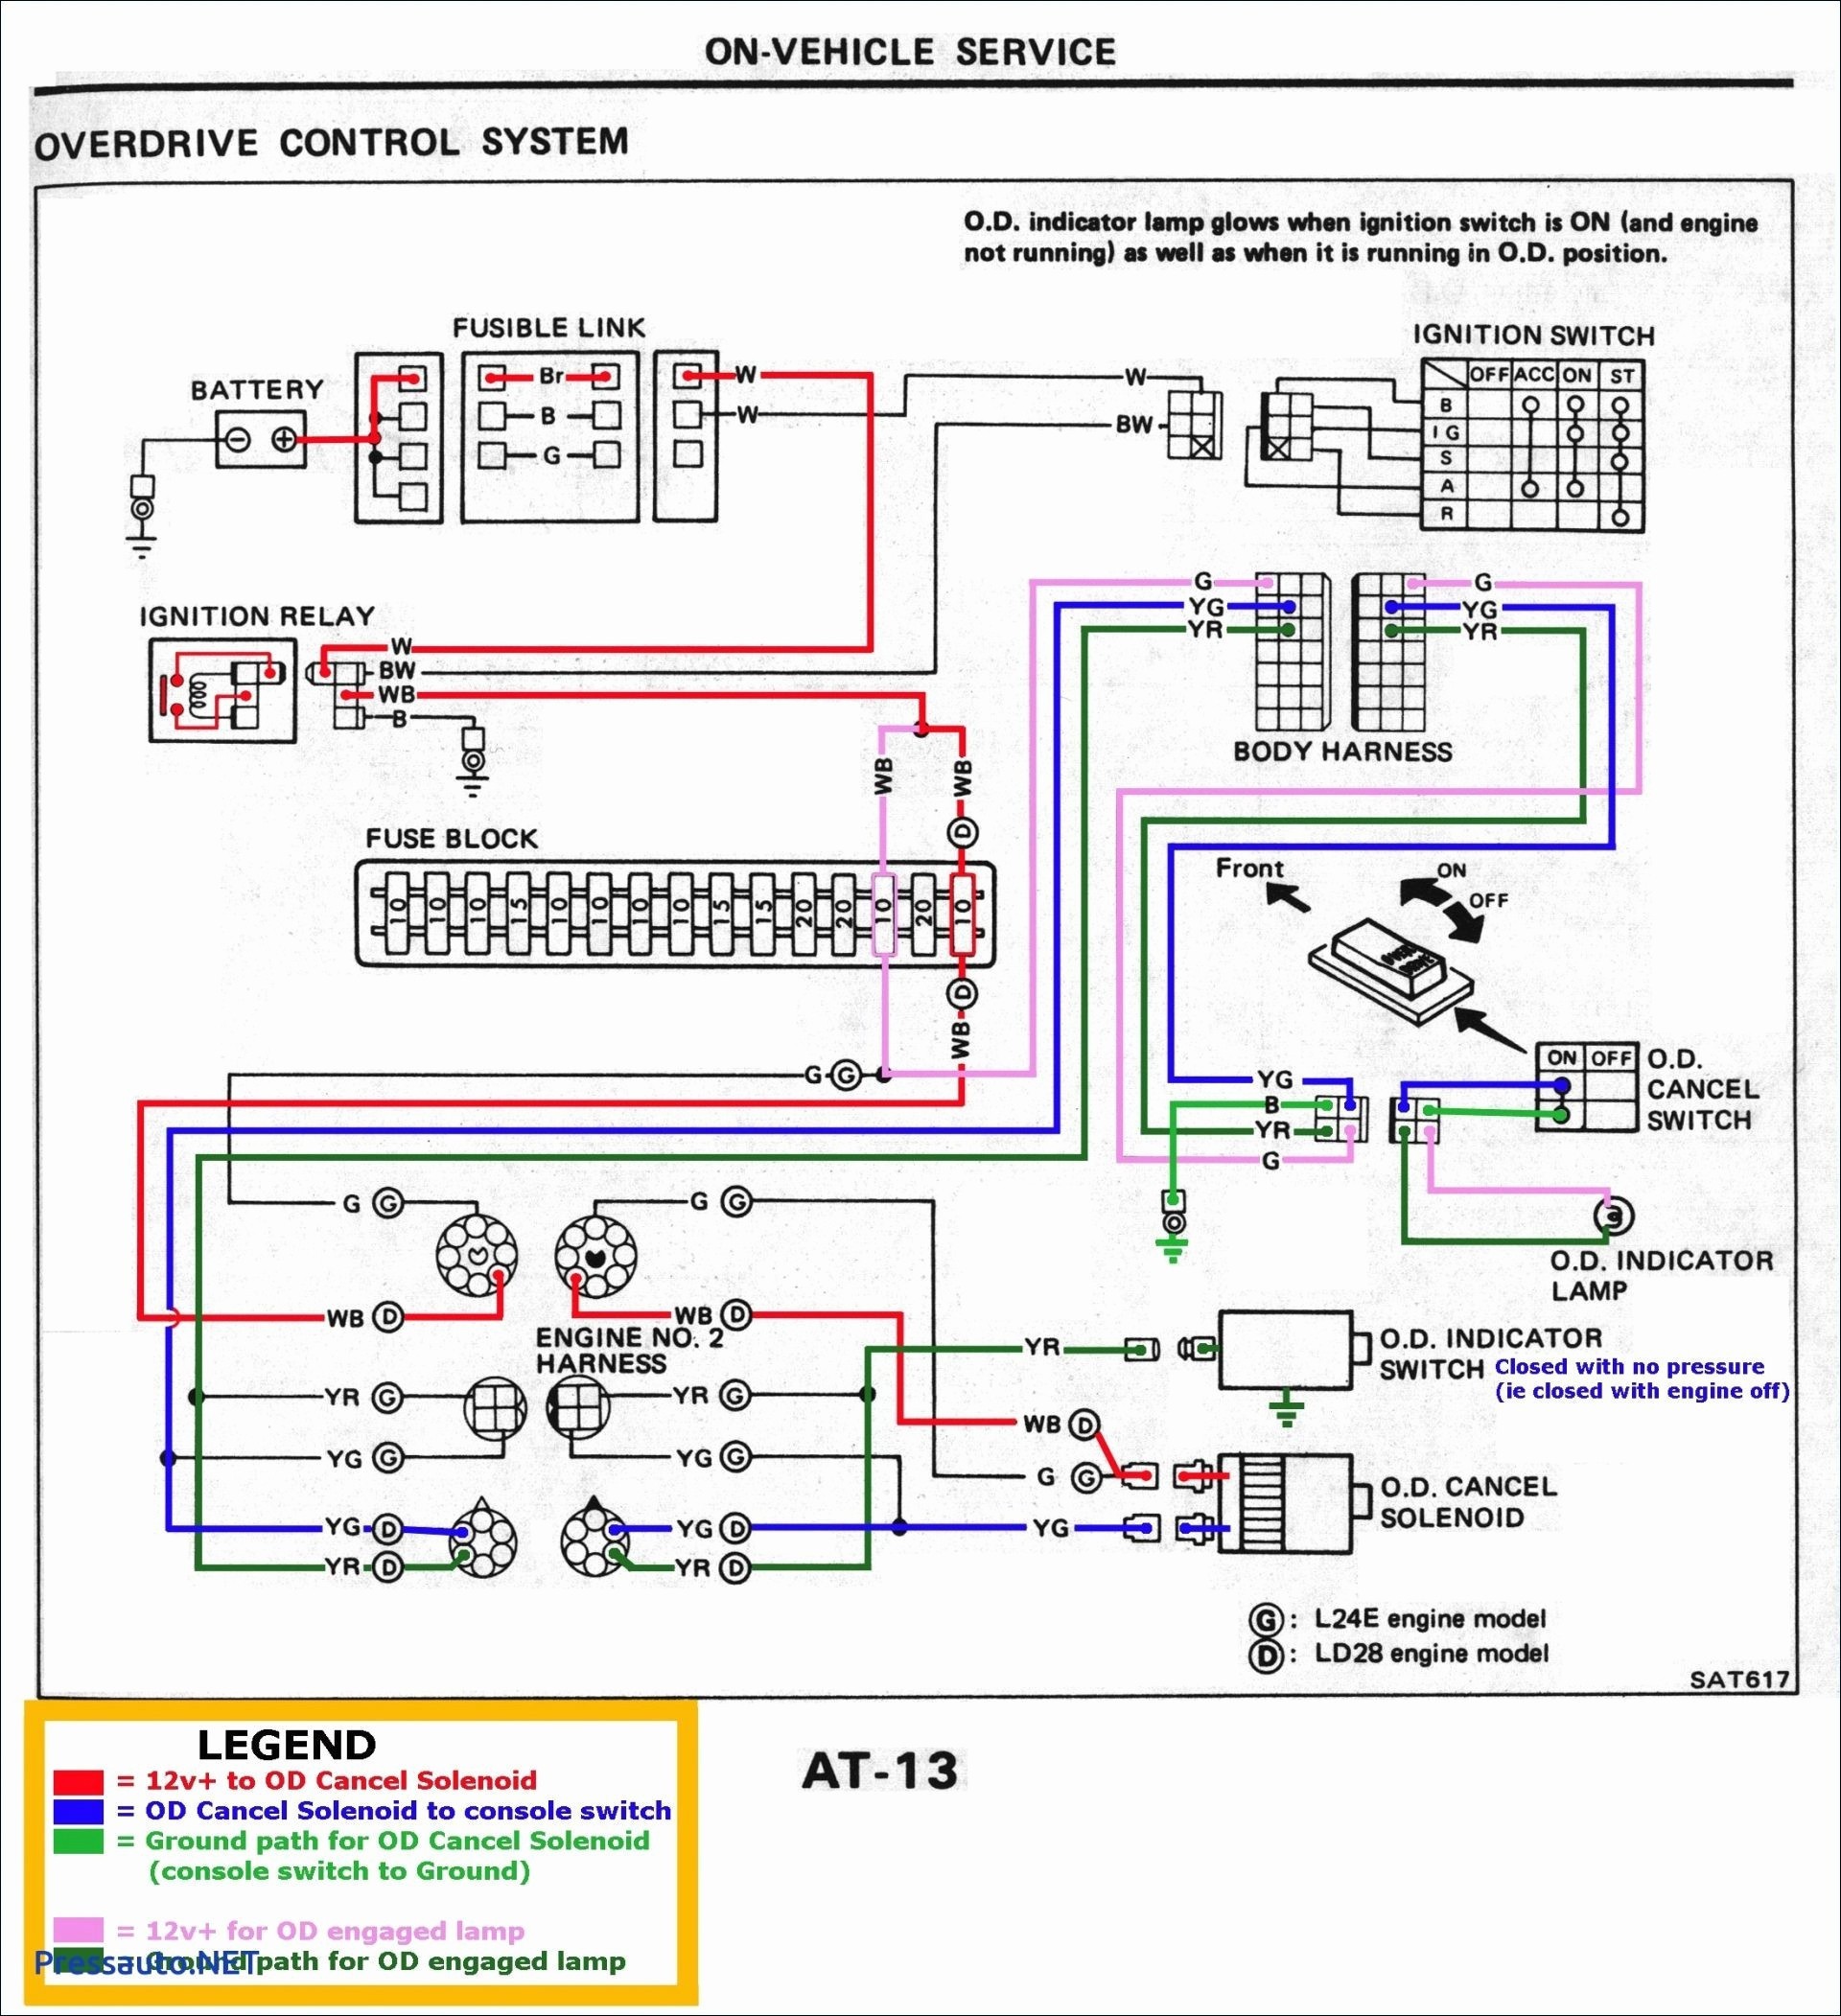 Omron Relay Wiring Diagram List Omron 8 Pin Relay Wiring Diagram Valid Wiring Diagram For A Relay To